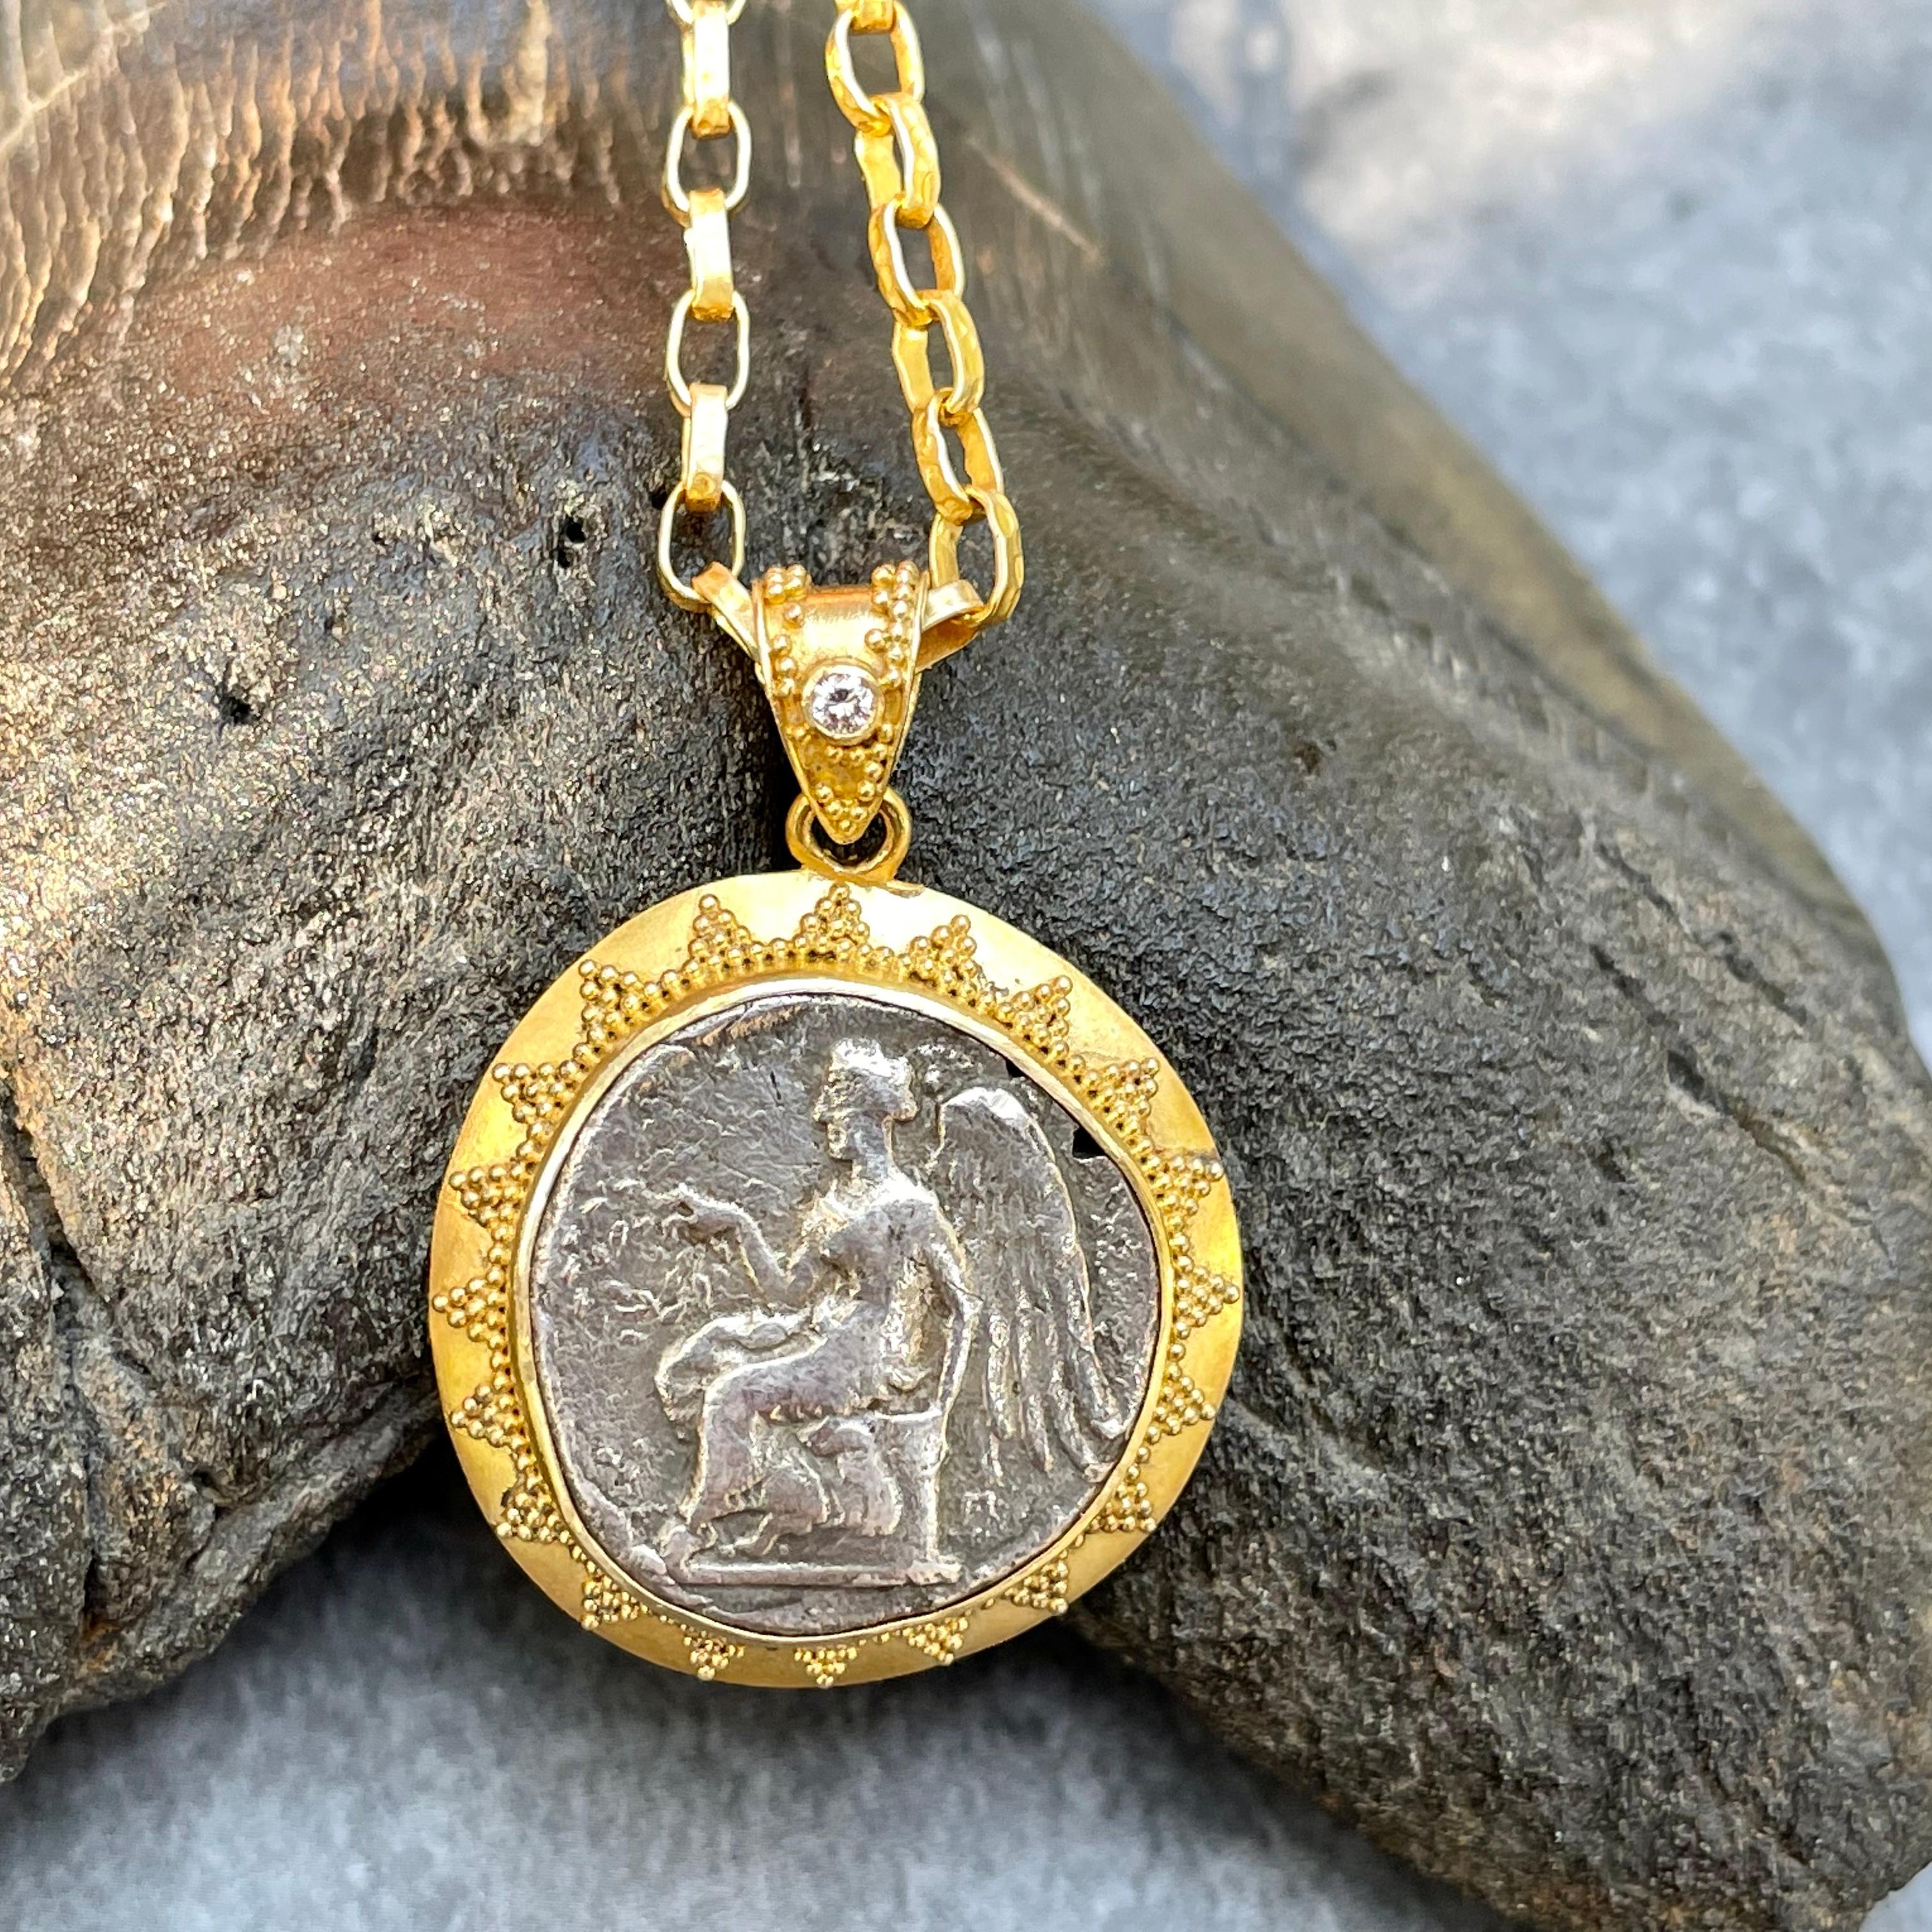 An authentic and rare ancient Greek coin from the Greek colony of Terina in Bruttium (now near the town of Lamezia Terme on the west coast of southern Italy) is set in fine geometric 22K gold granulation in this ancient-inspired Steven Battelle